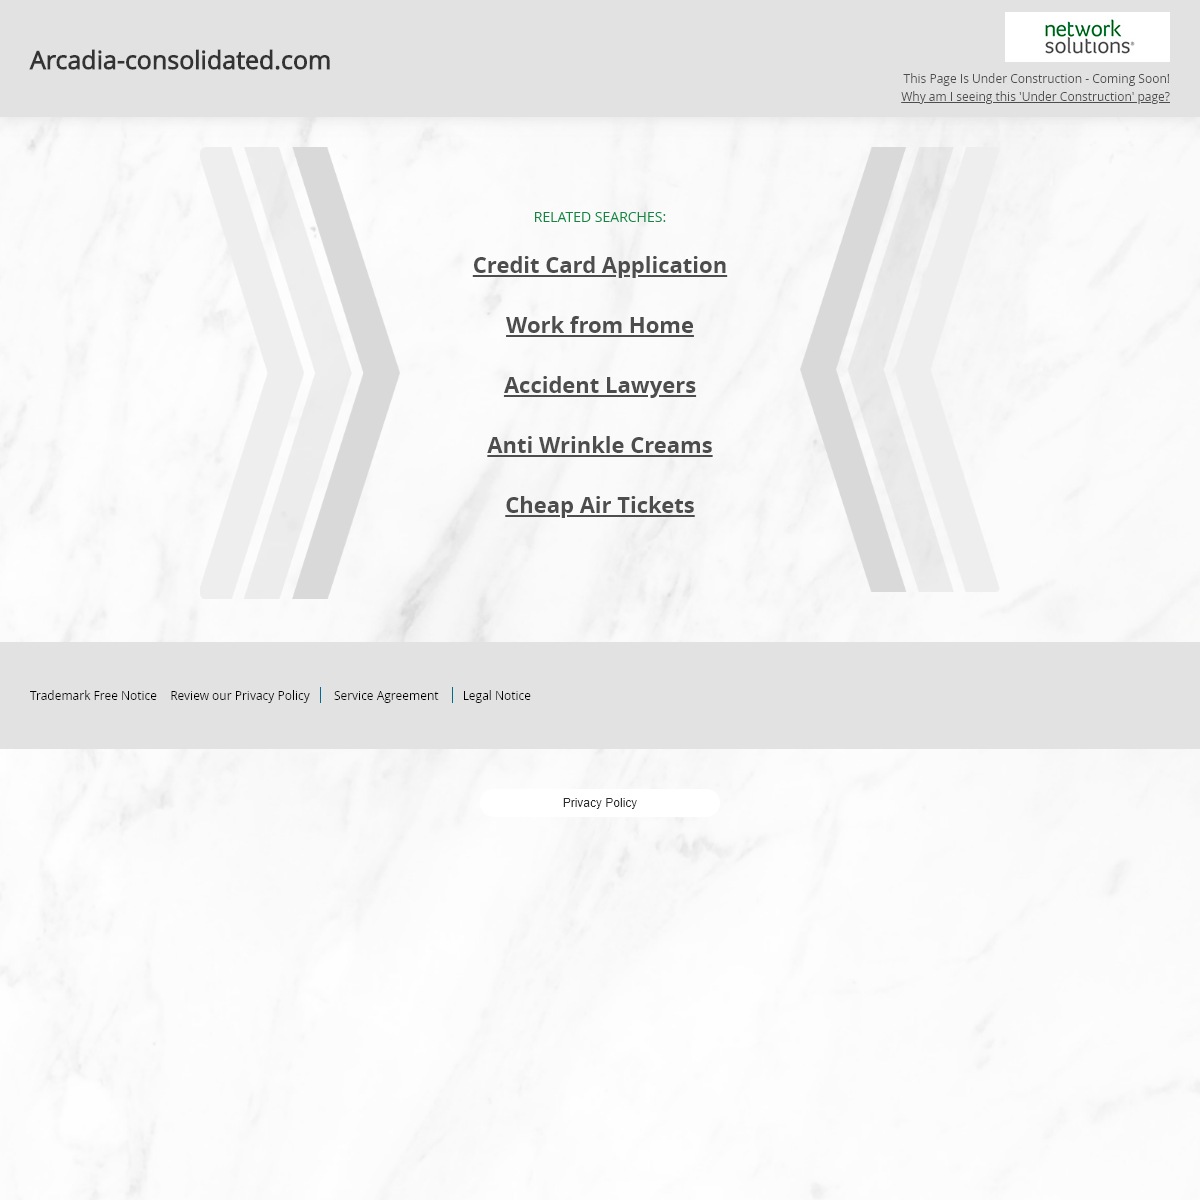 A complete backup of arcadia-consolidated.com